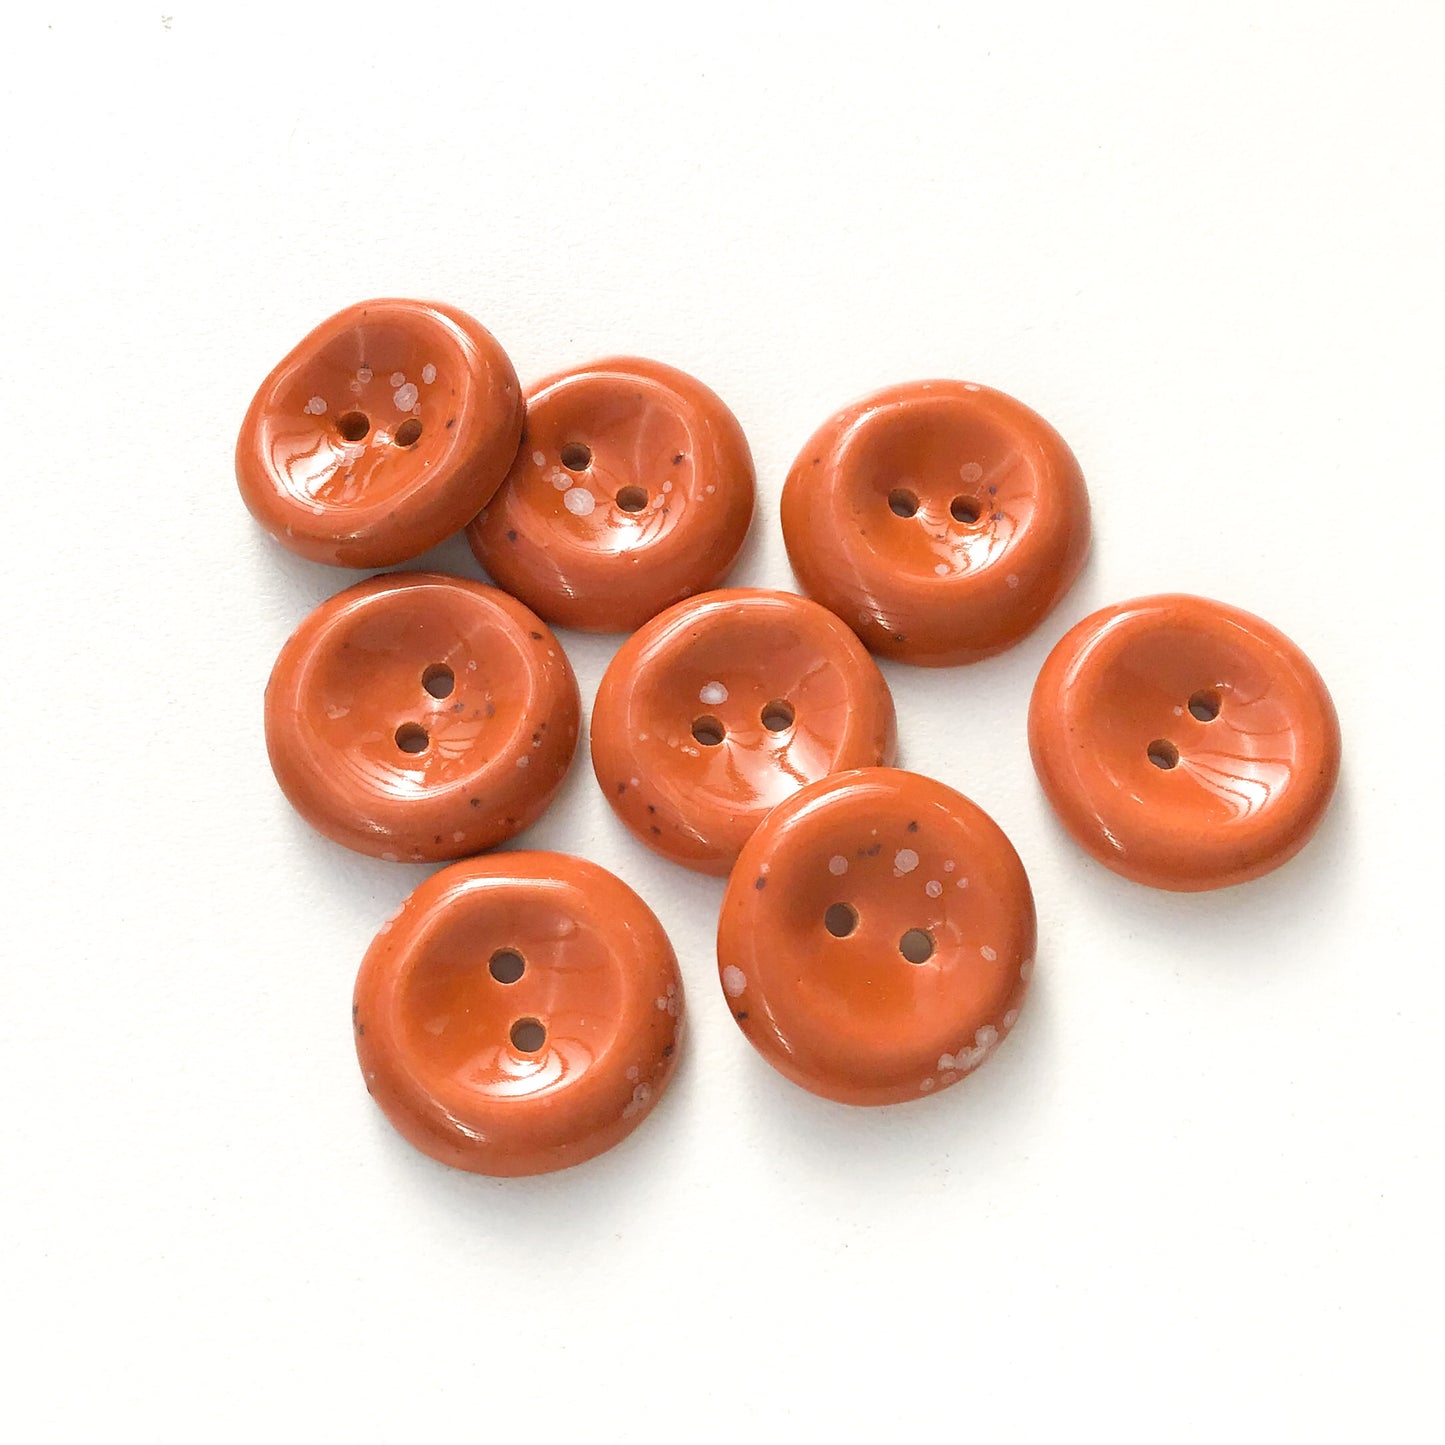 Rust Orange Ceramic Buttons - Speckled Clay Buttons - 3/4" - 8 Pack